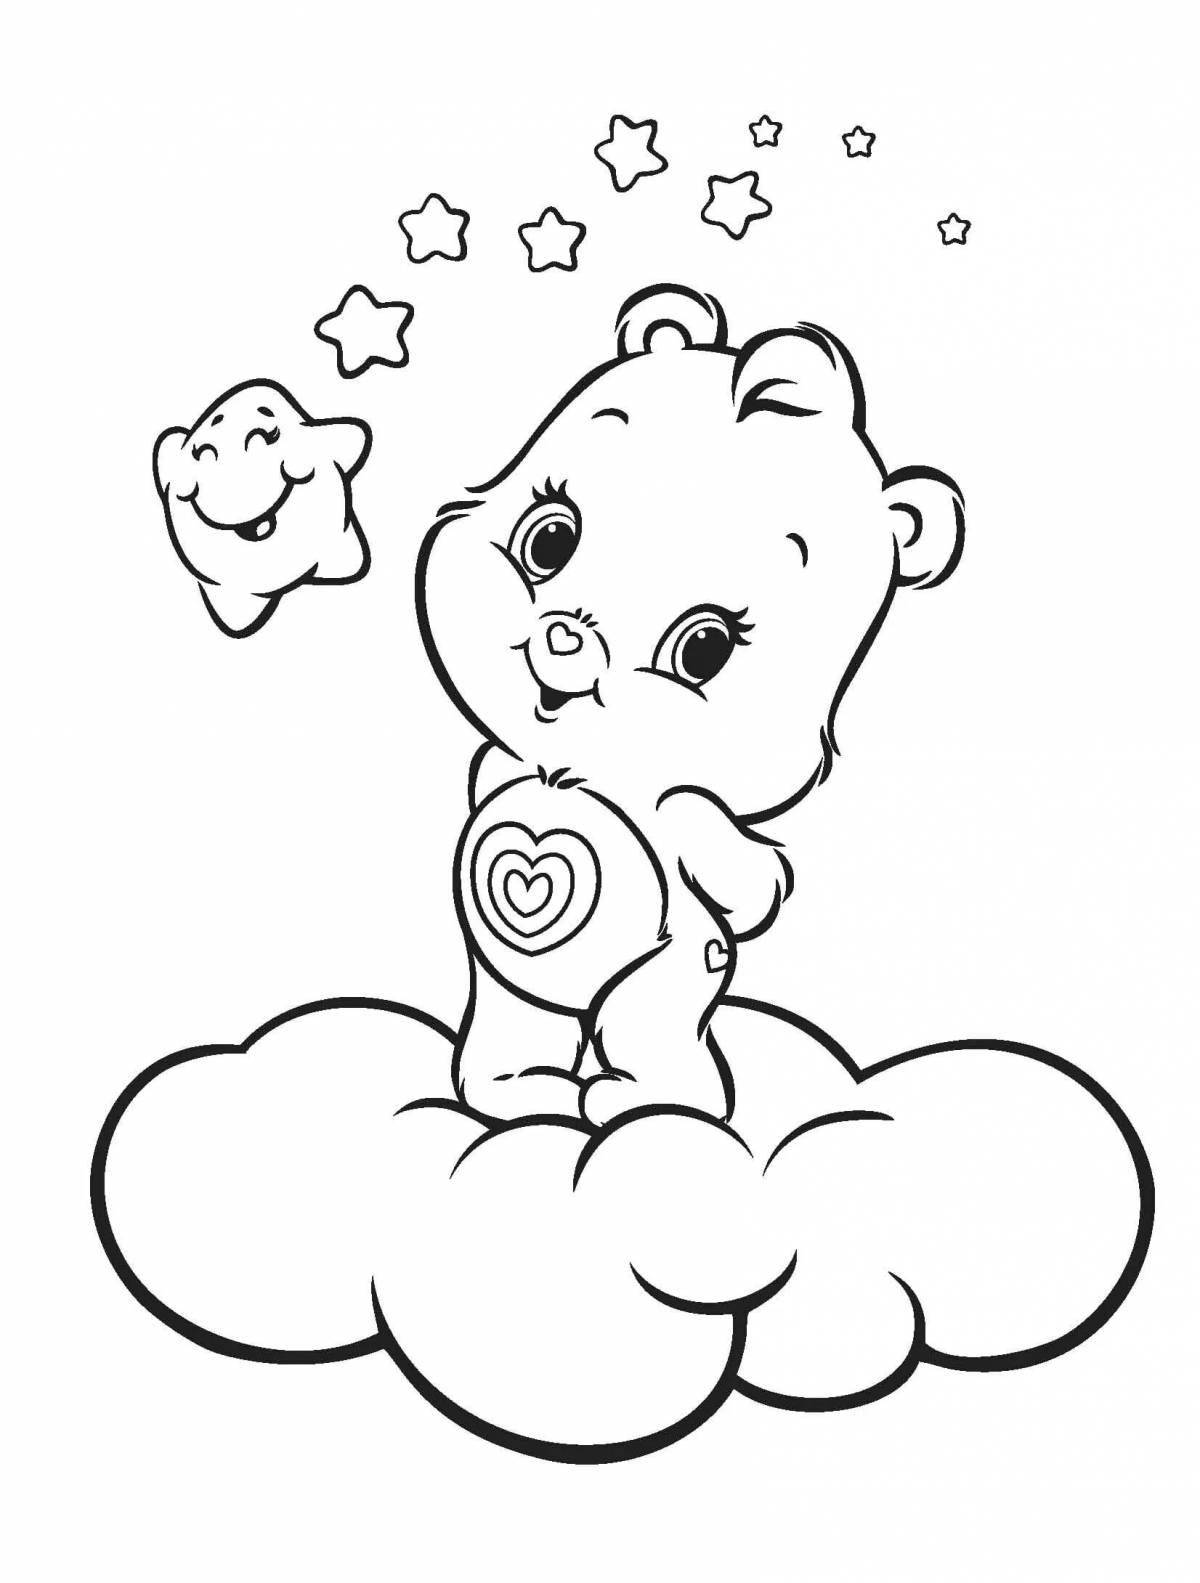 Coloring page adorable teddy bear